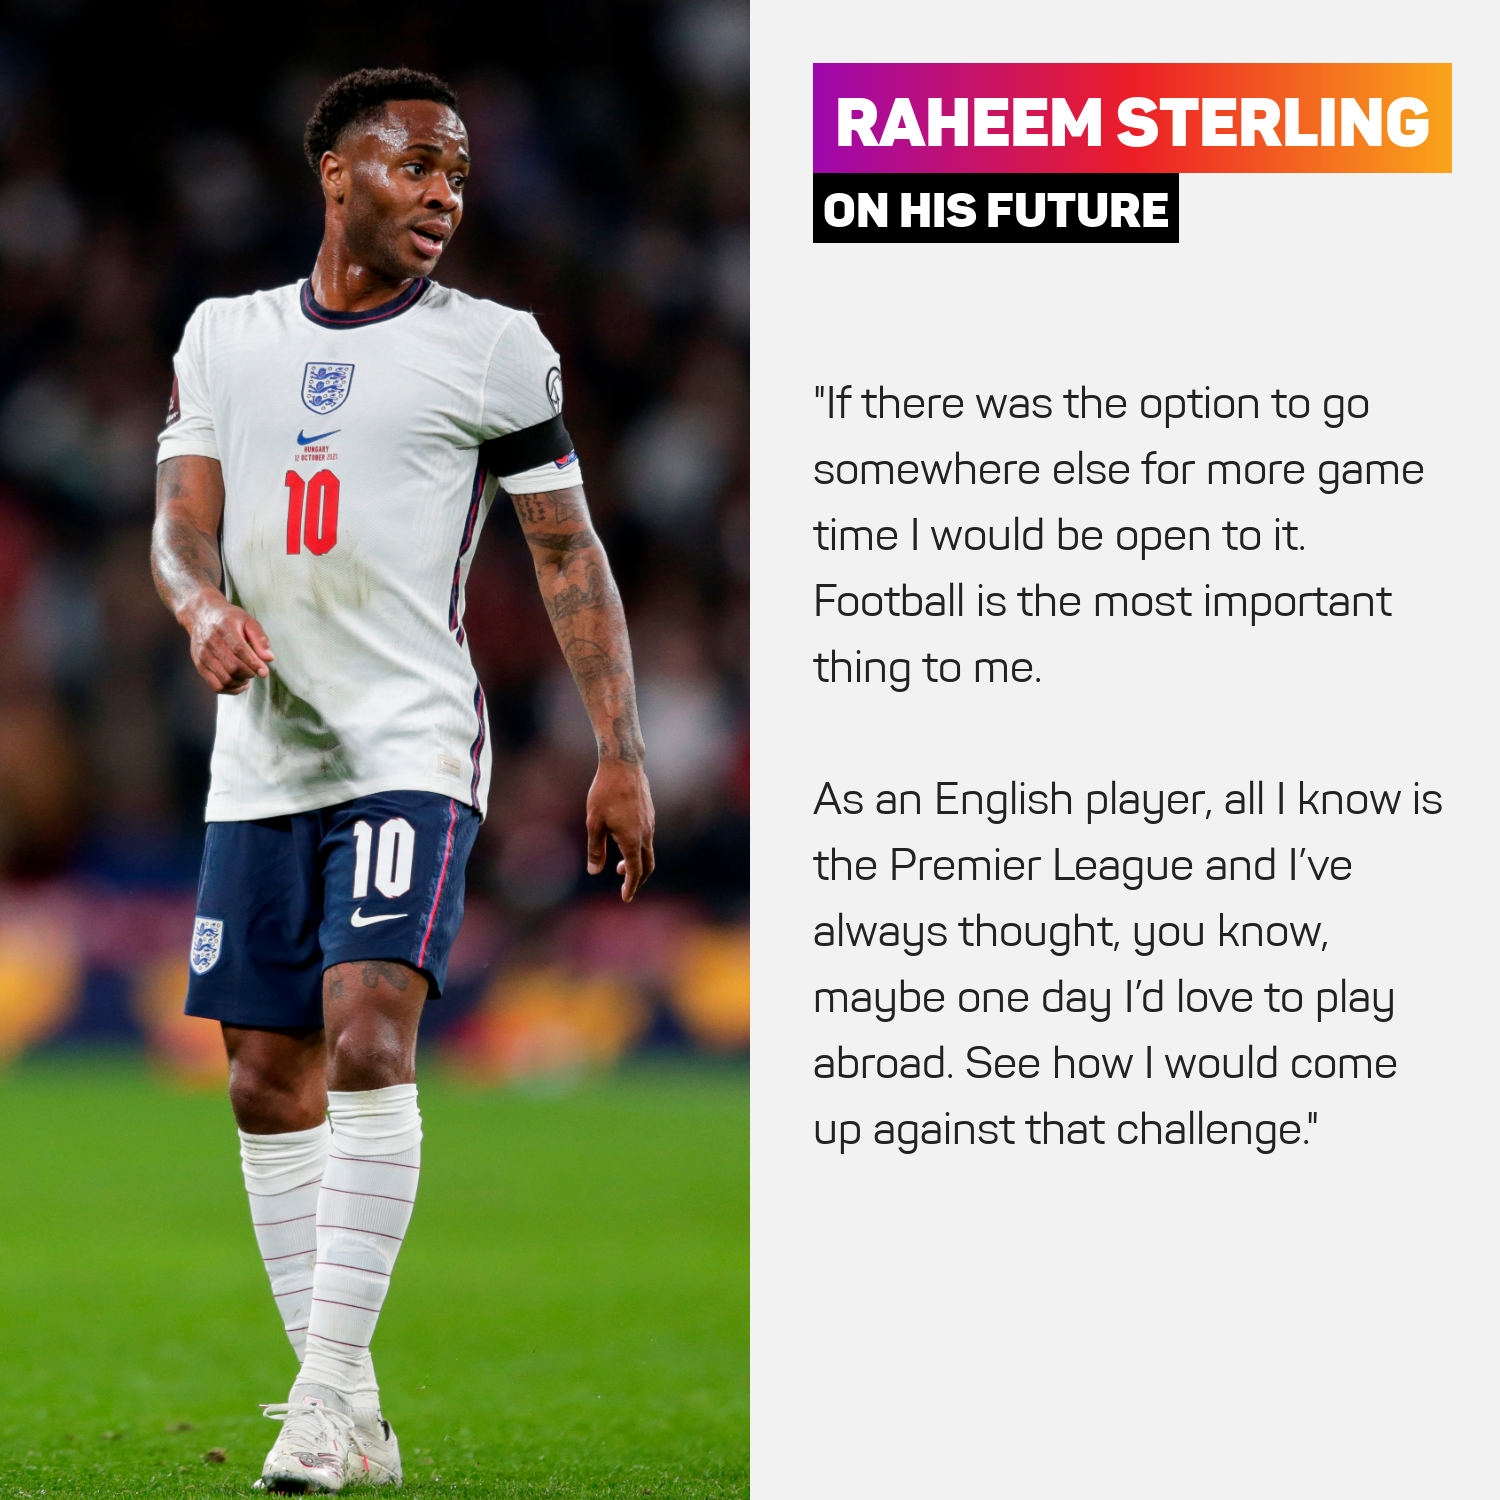 Raheem Sterling is unsure on his future